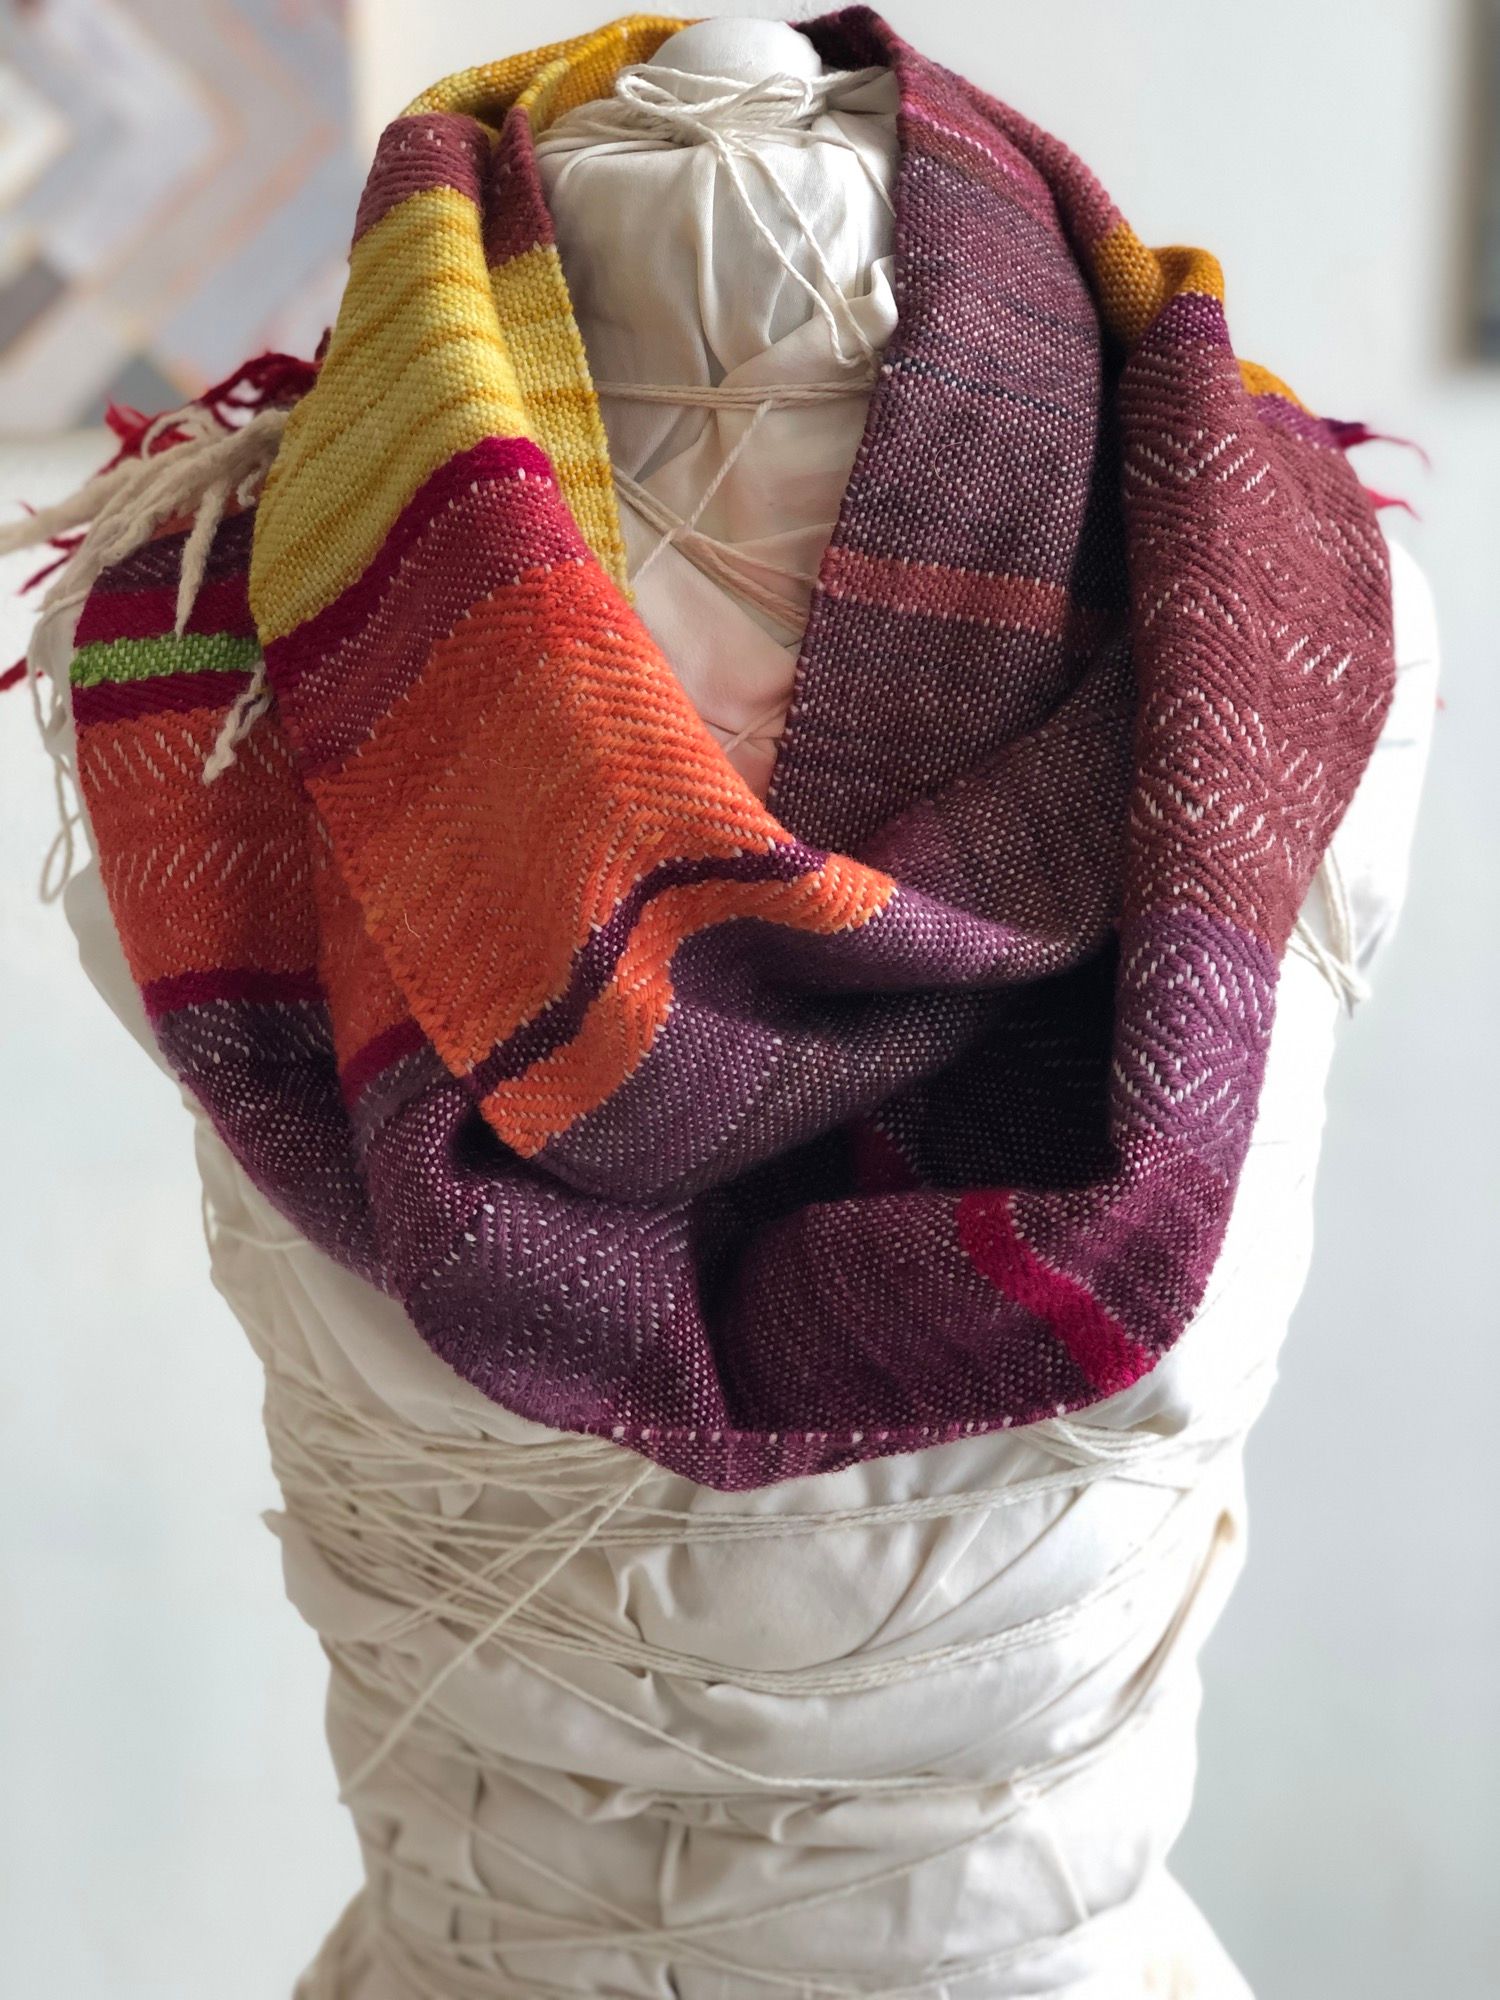 purple, yellow, orange and rainbow handwoven cowl scarf with fringe on a white mannequin in a white walled gallery